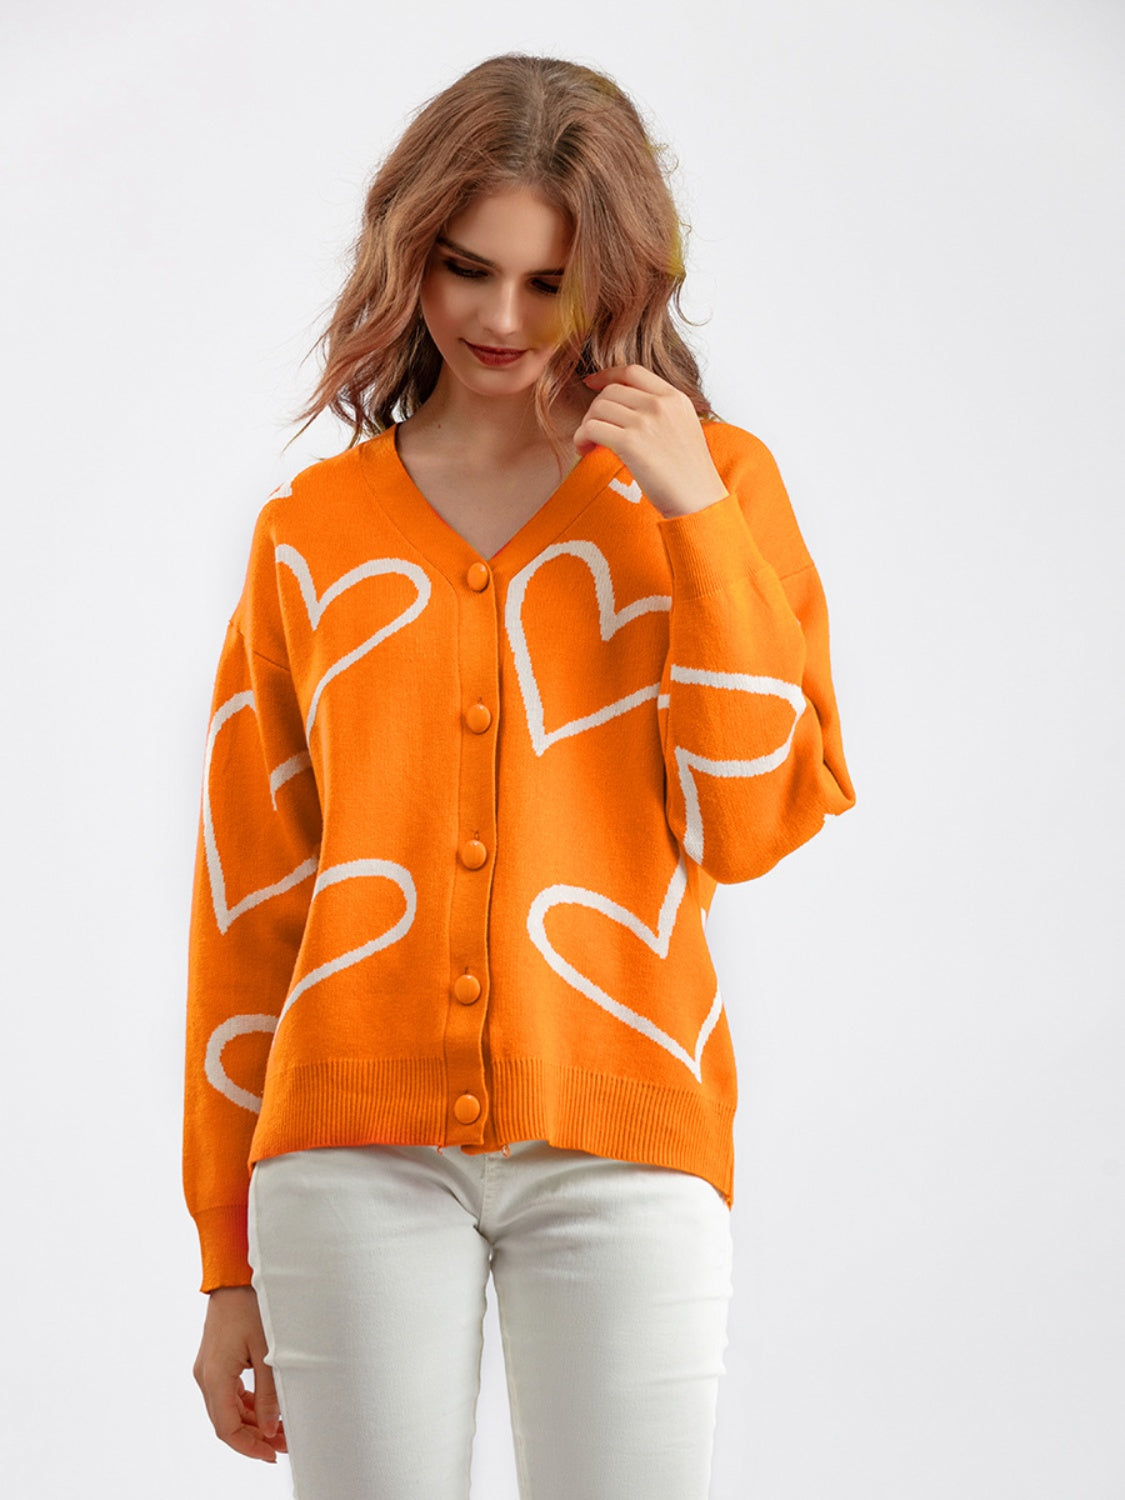 Heart Button Down Cardigan - Orange / One Size - Women’s Clothing & Accessories - Shirts & Tops - 7 - 2024